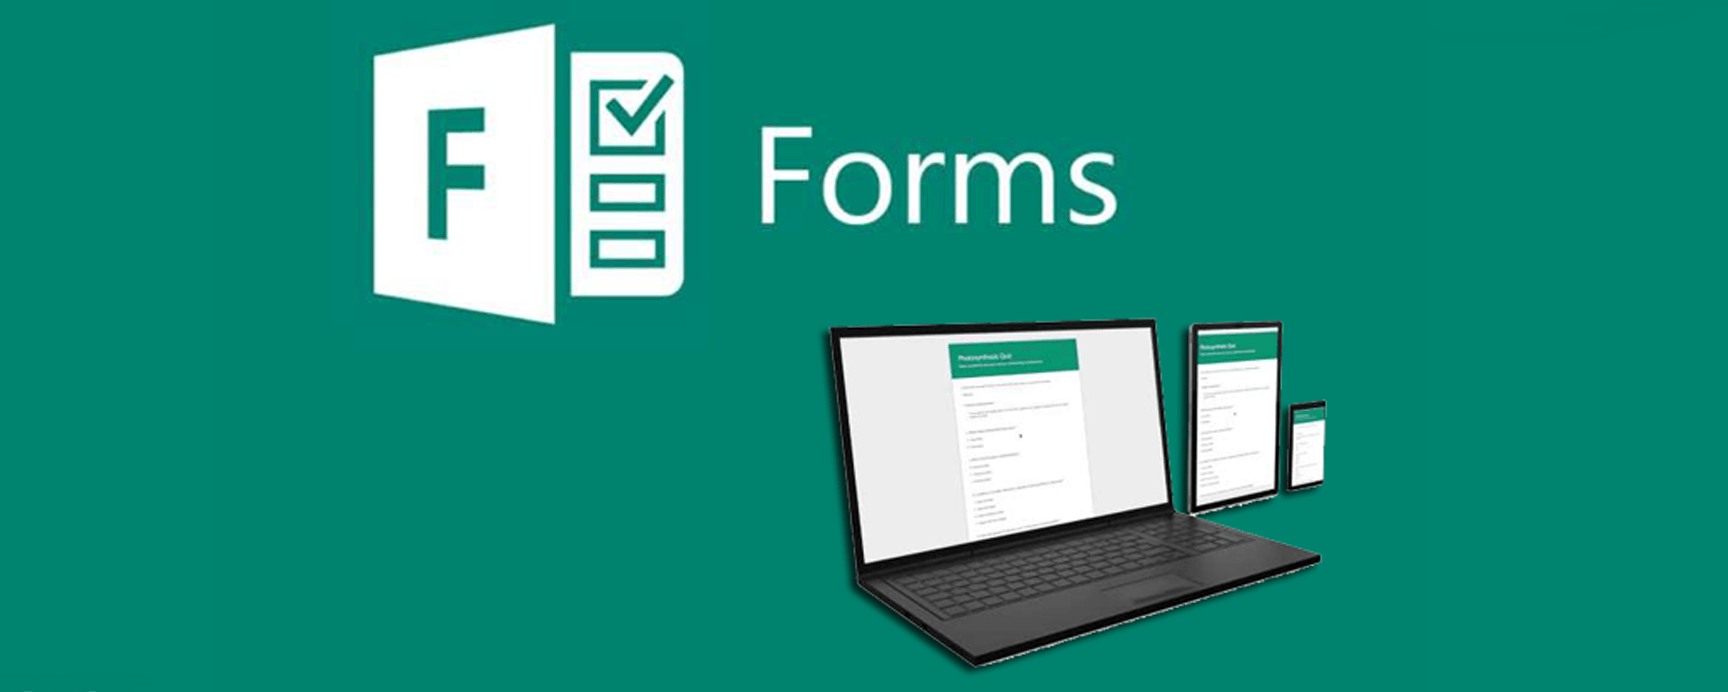 Microsoft Forms Logo - GETTING MORE FROM OFFICE 365 – FORMS | Your IT Department